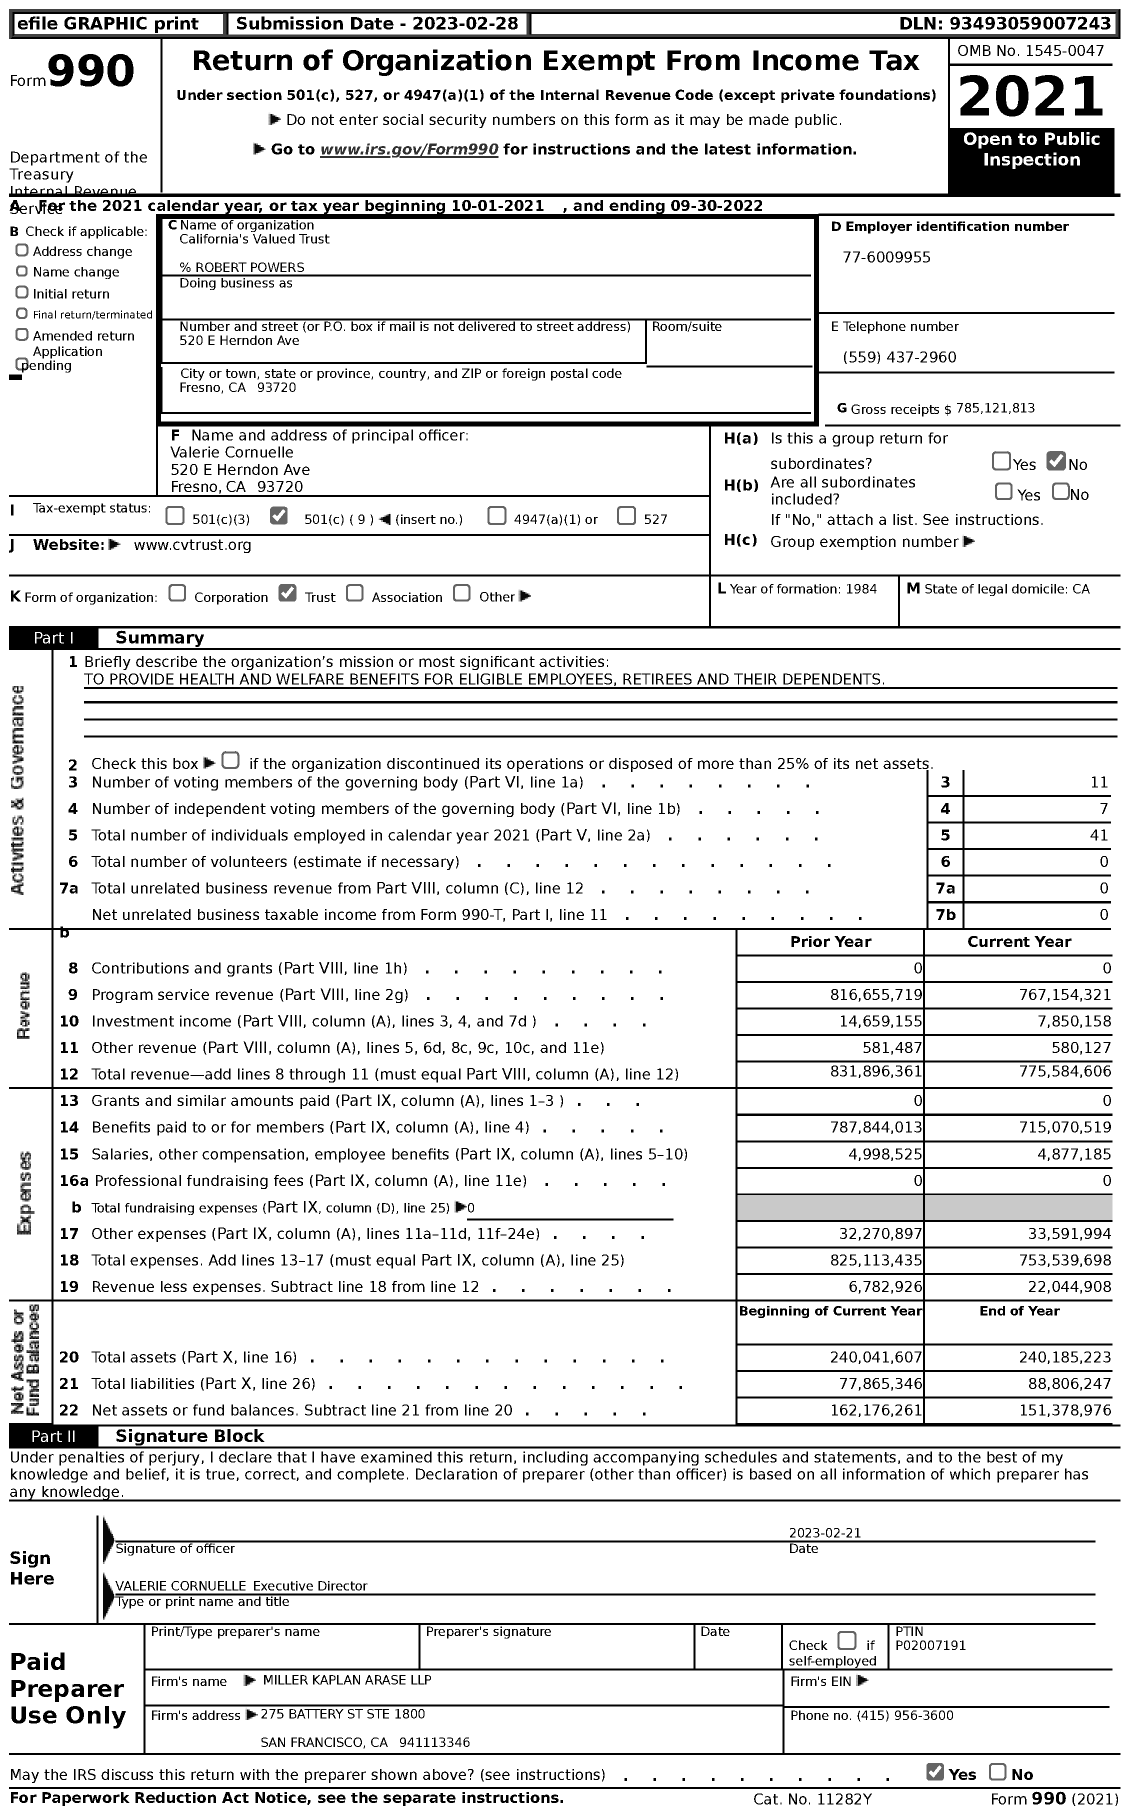 Image of first page of 2021 Form 990 for California's Valued Trust